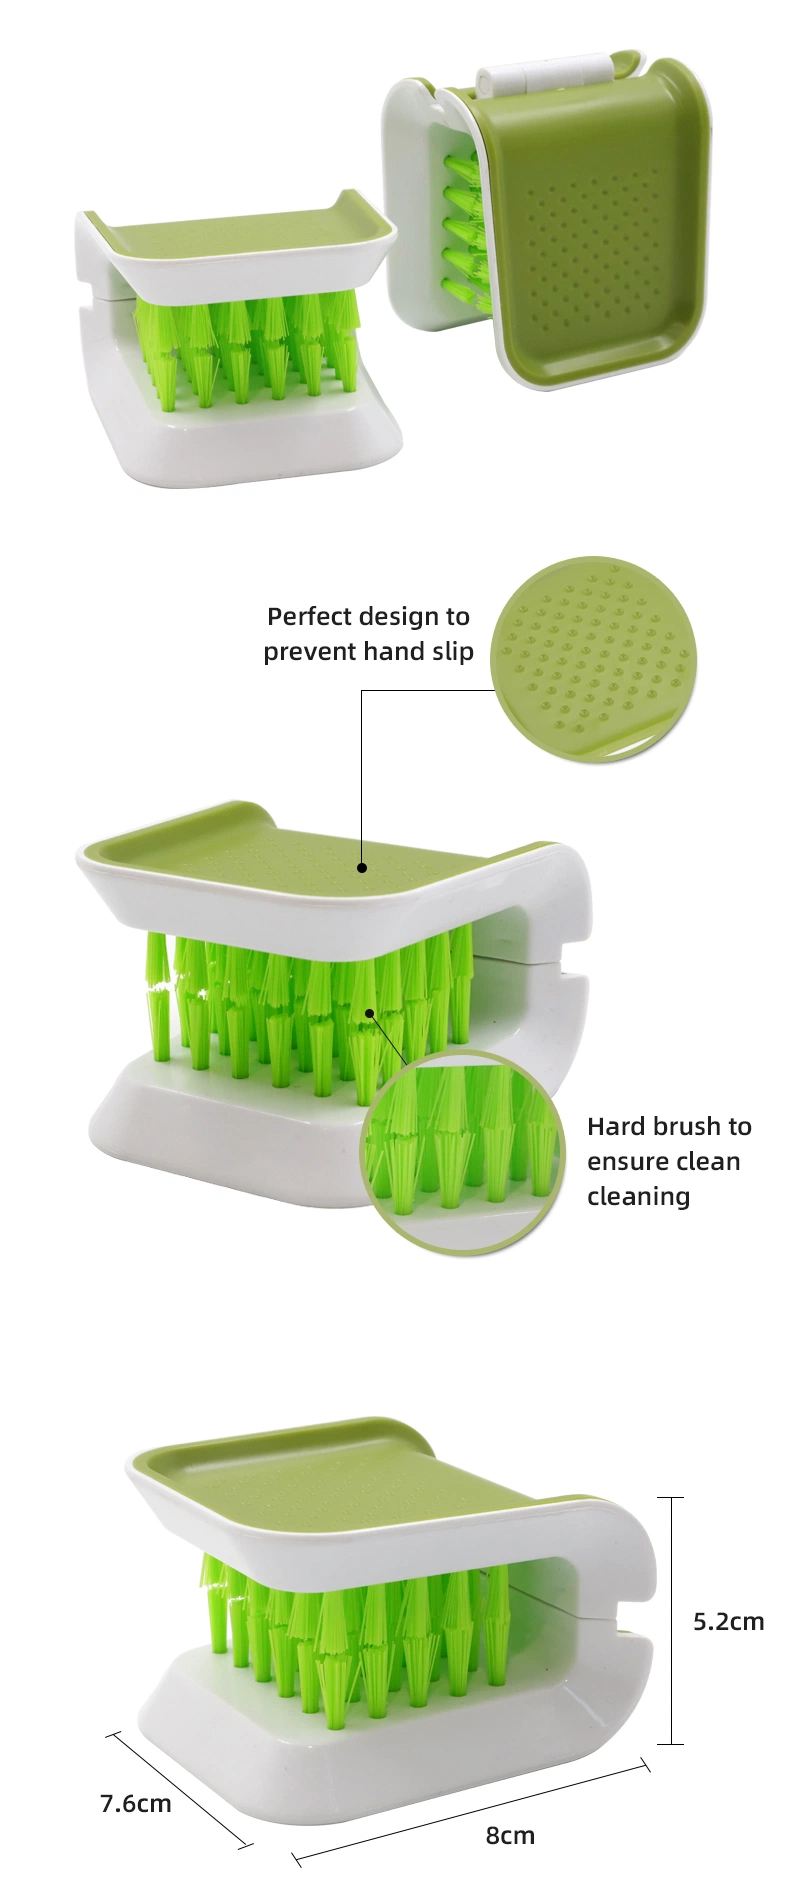 Double-Sided Plate Cleaning Sponge Kitchen Cleaning Cooktop Pot Washing Brush